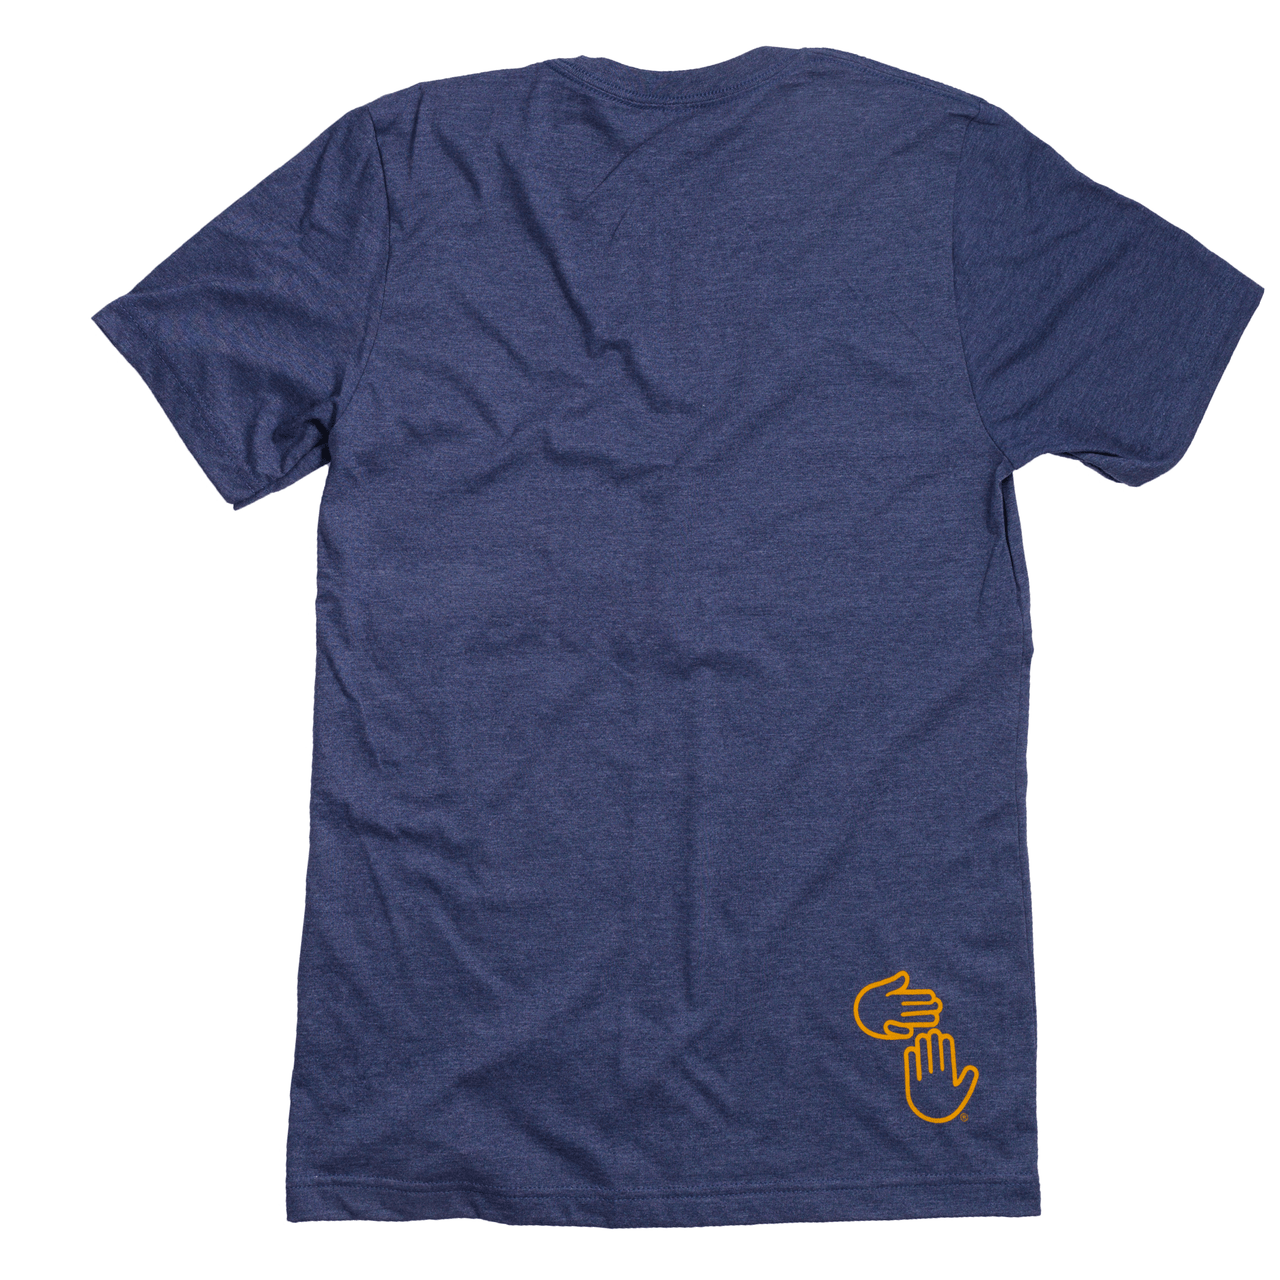 Michigan Hands Tee (Navy and Gold)